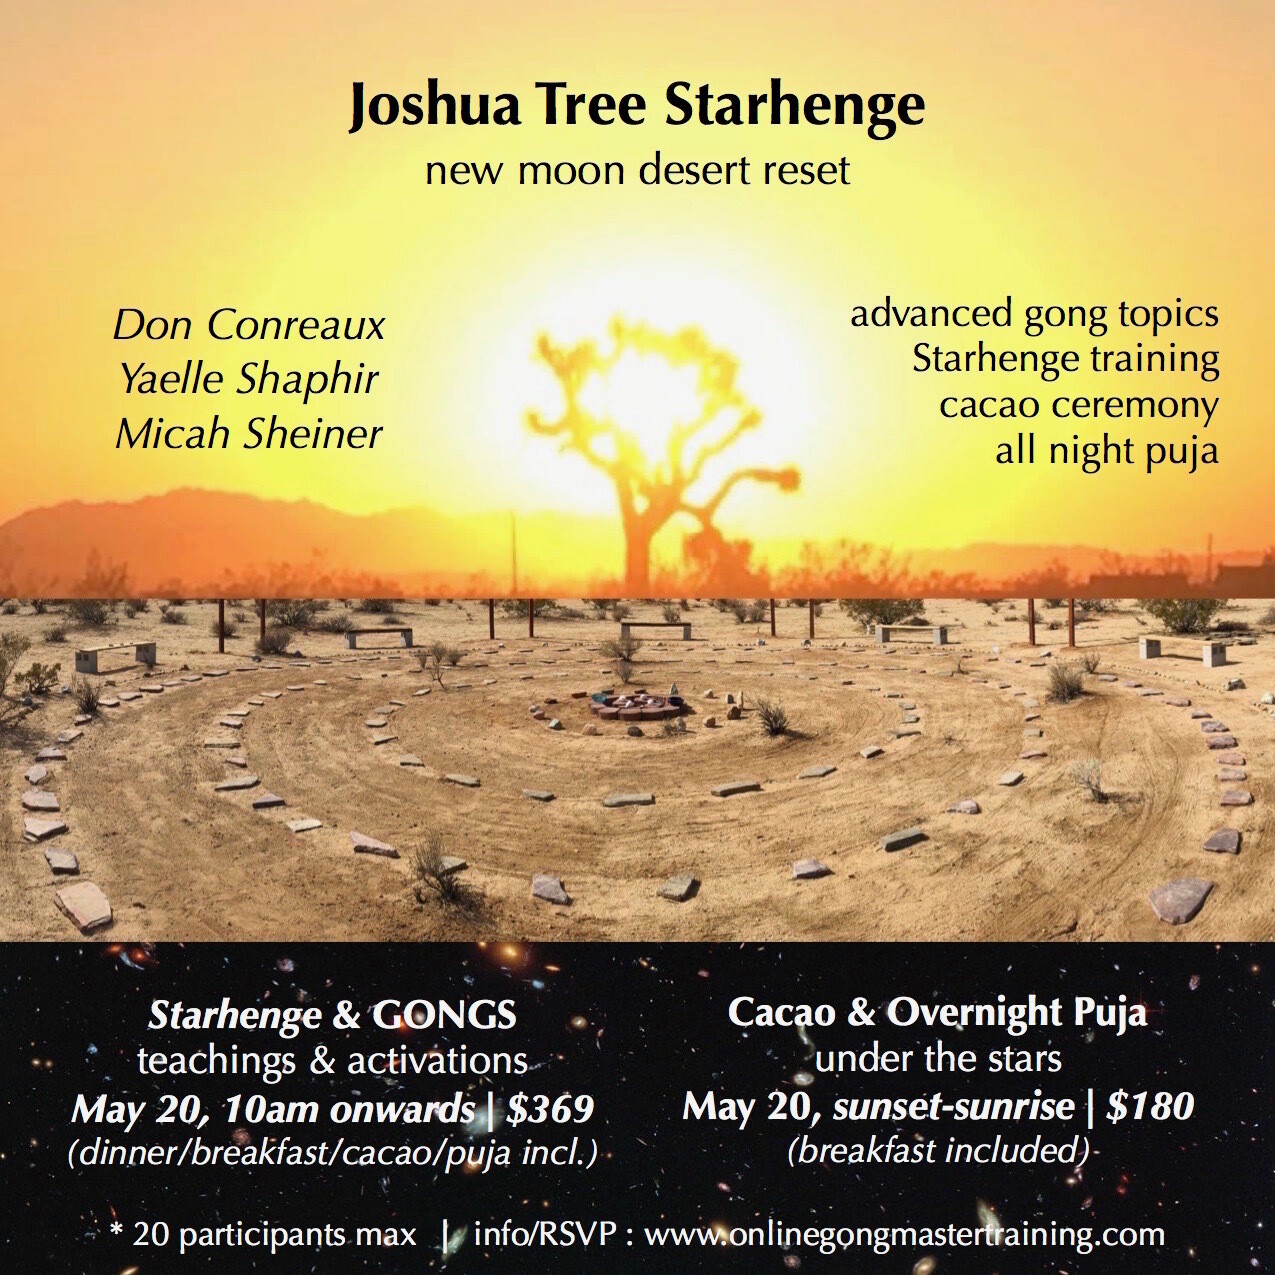 MAY 20-21 2023
STARHENGE ADVANCED GONG MASTERY STUDY with Don Conreaux, Micah Sheiner, Yaelle E. Shaphir, L.Ac + New Moon Cacao Gong All Night Gong Puja under the stars